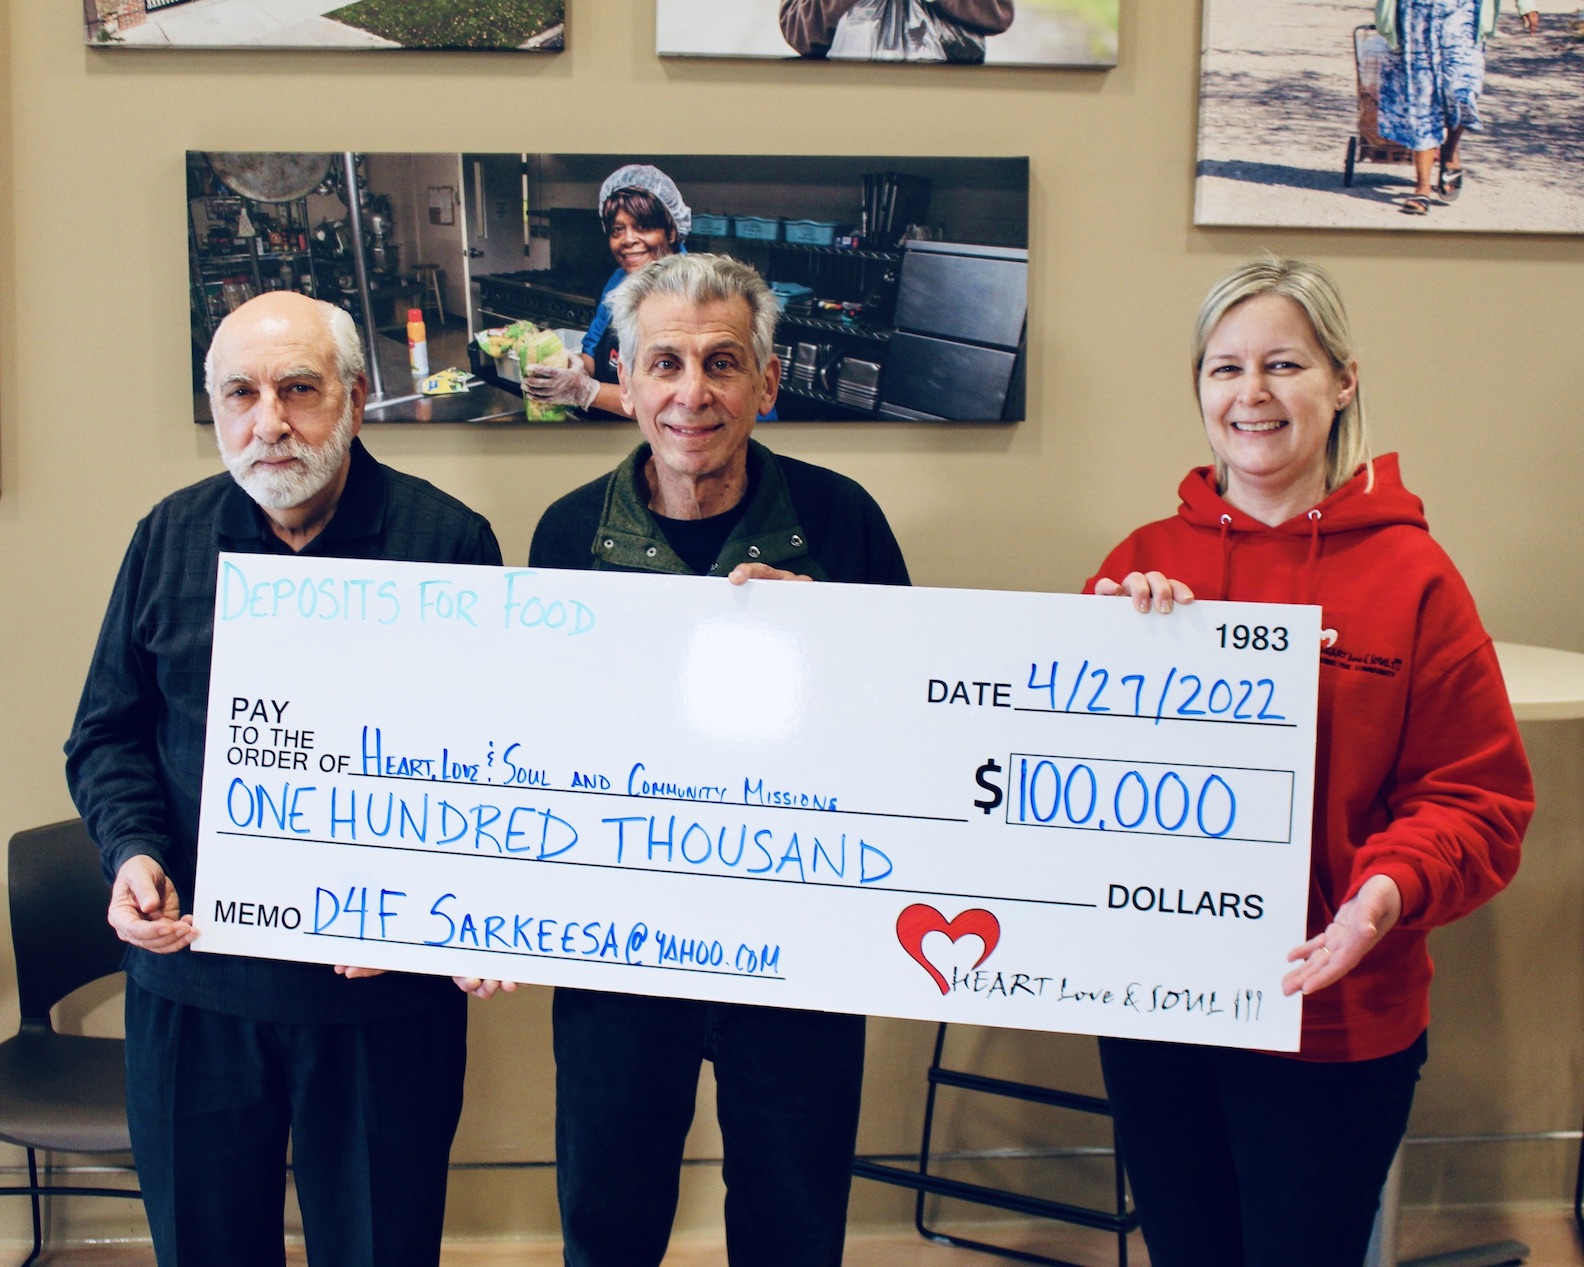 Pictured, from left: Community Missions Vice President Joe Sbarbati, `Deposits for Food` founder Angelo Sarkees and Heart, Love & Soul Assistant Director Pam Dixon. (Submitted photo)